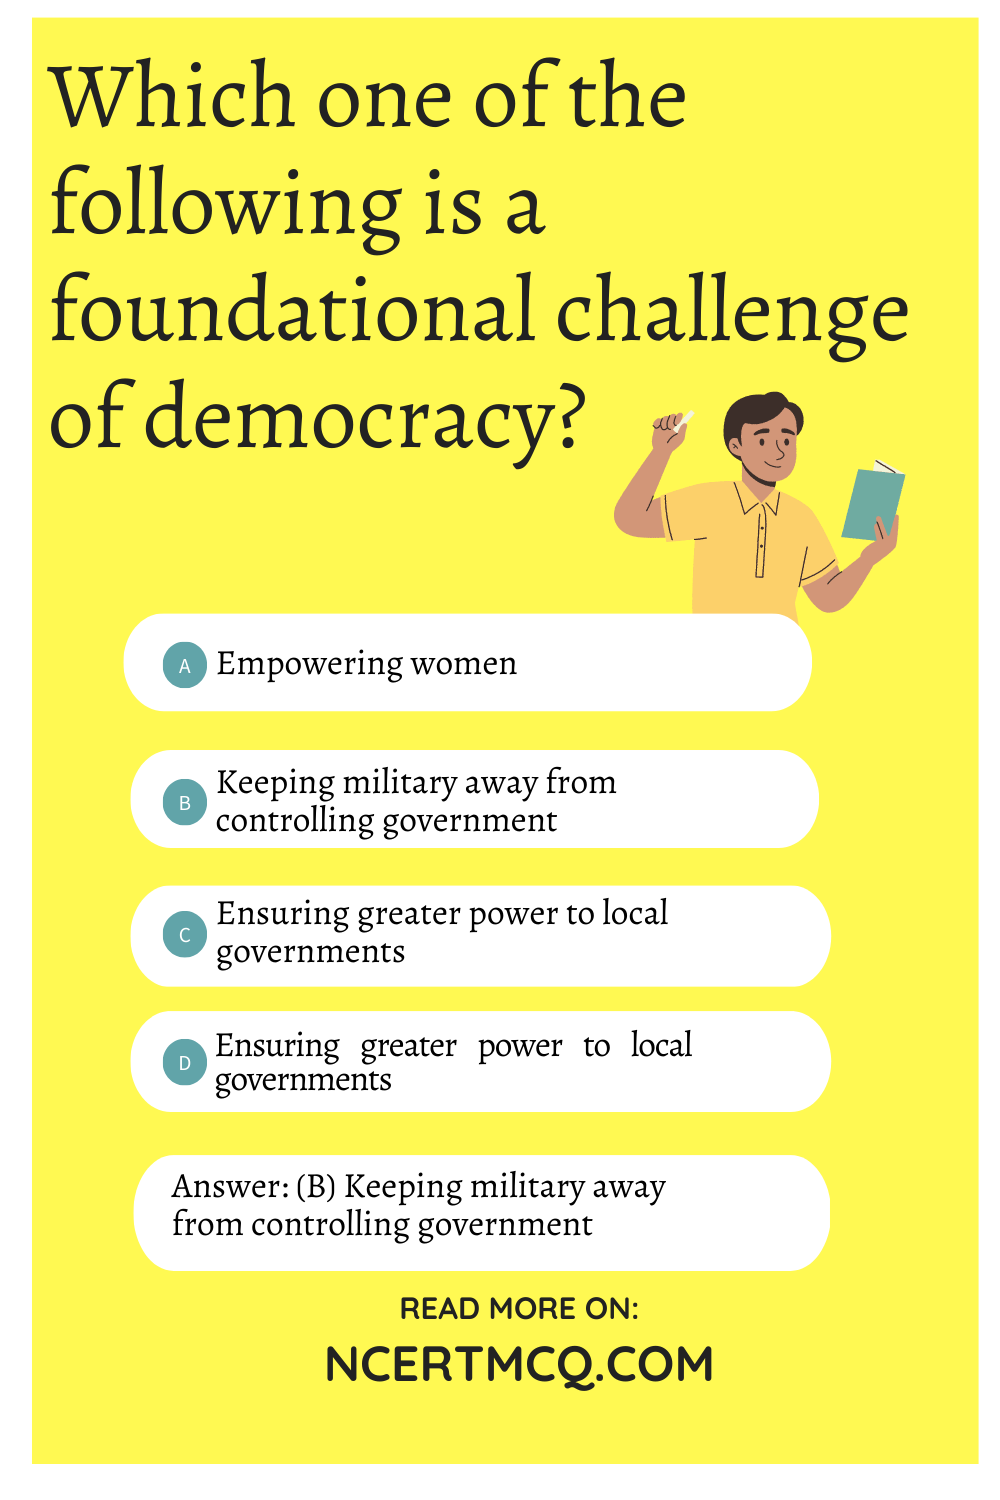 Which one of the following is a foundational challenge of democracy?